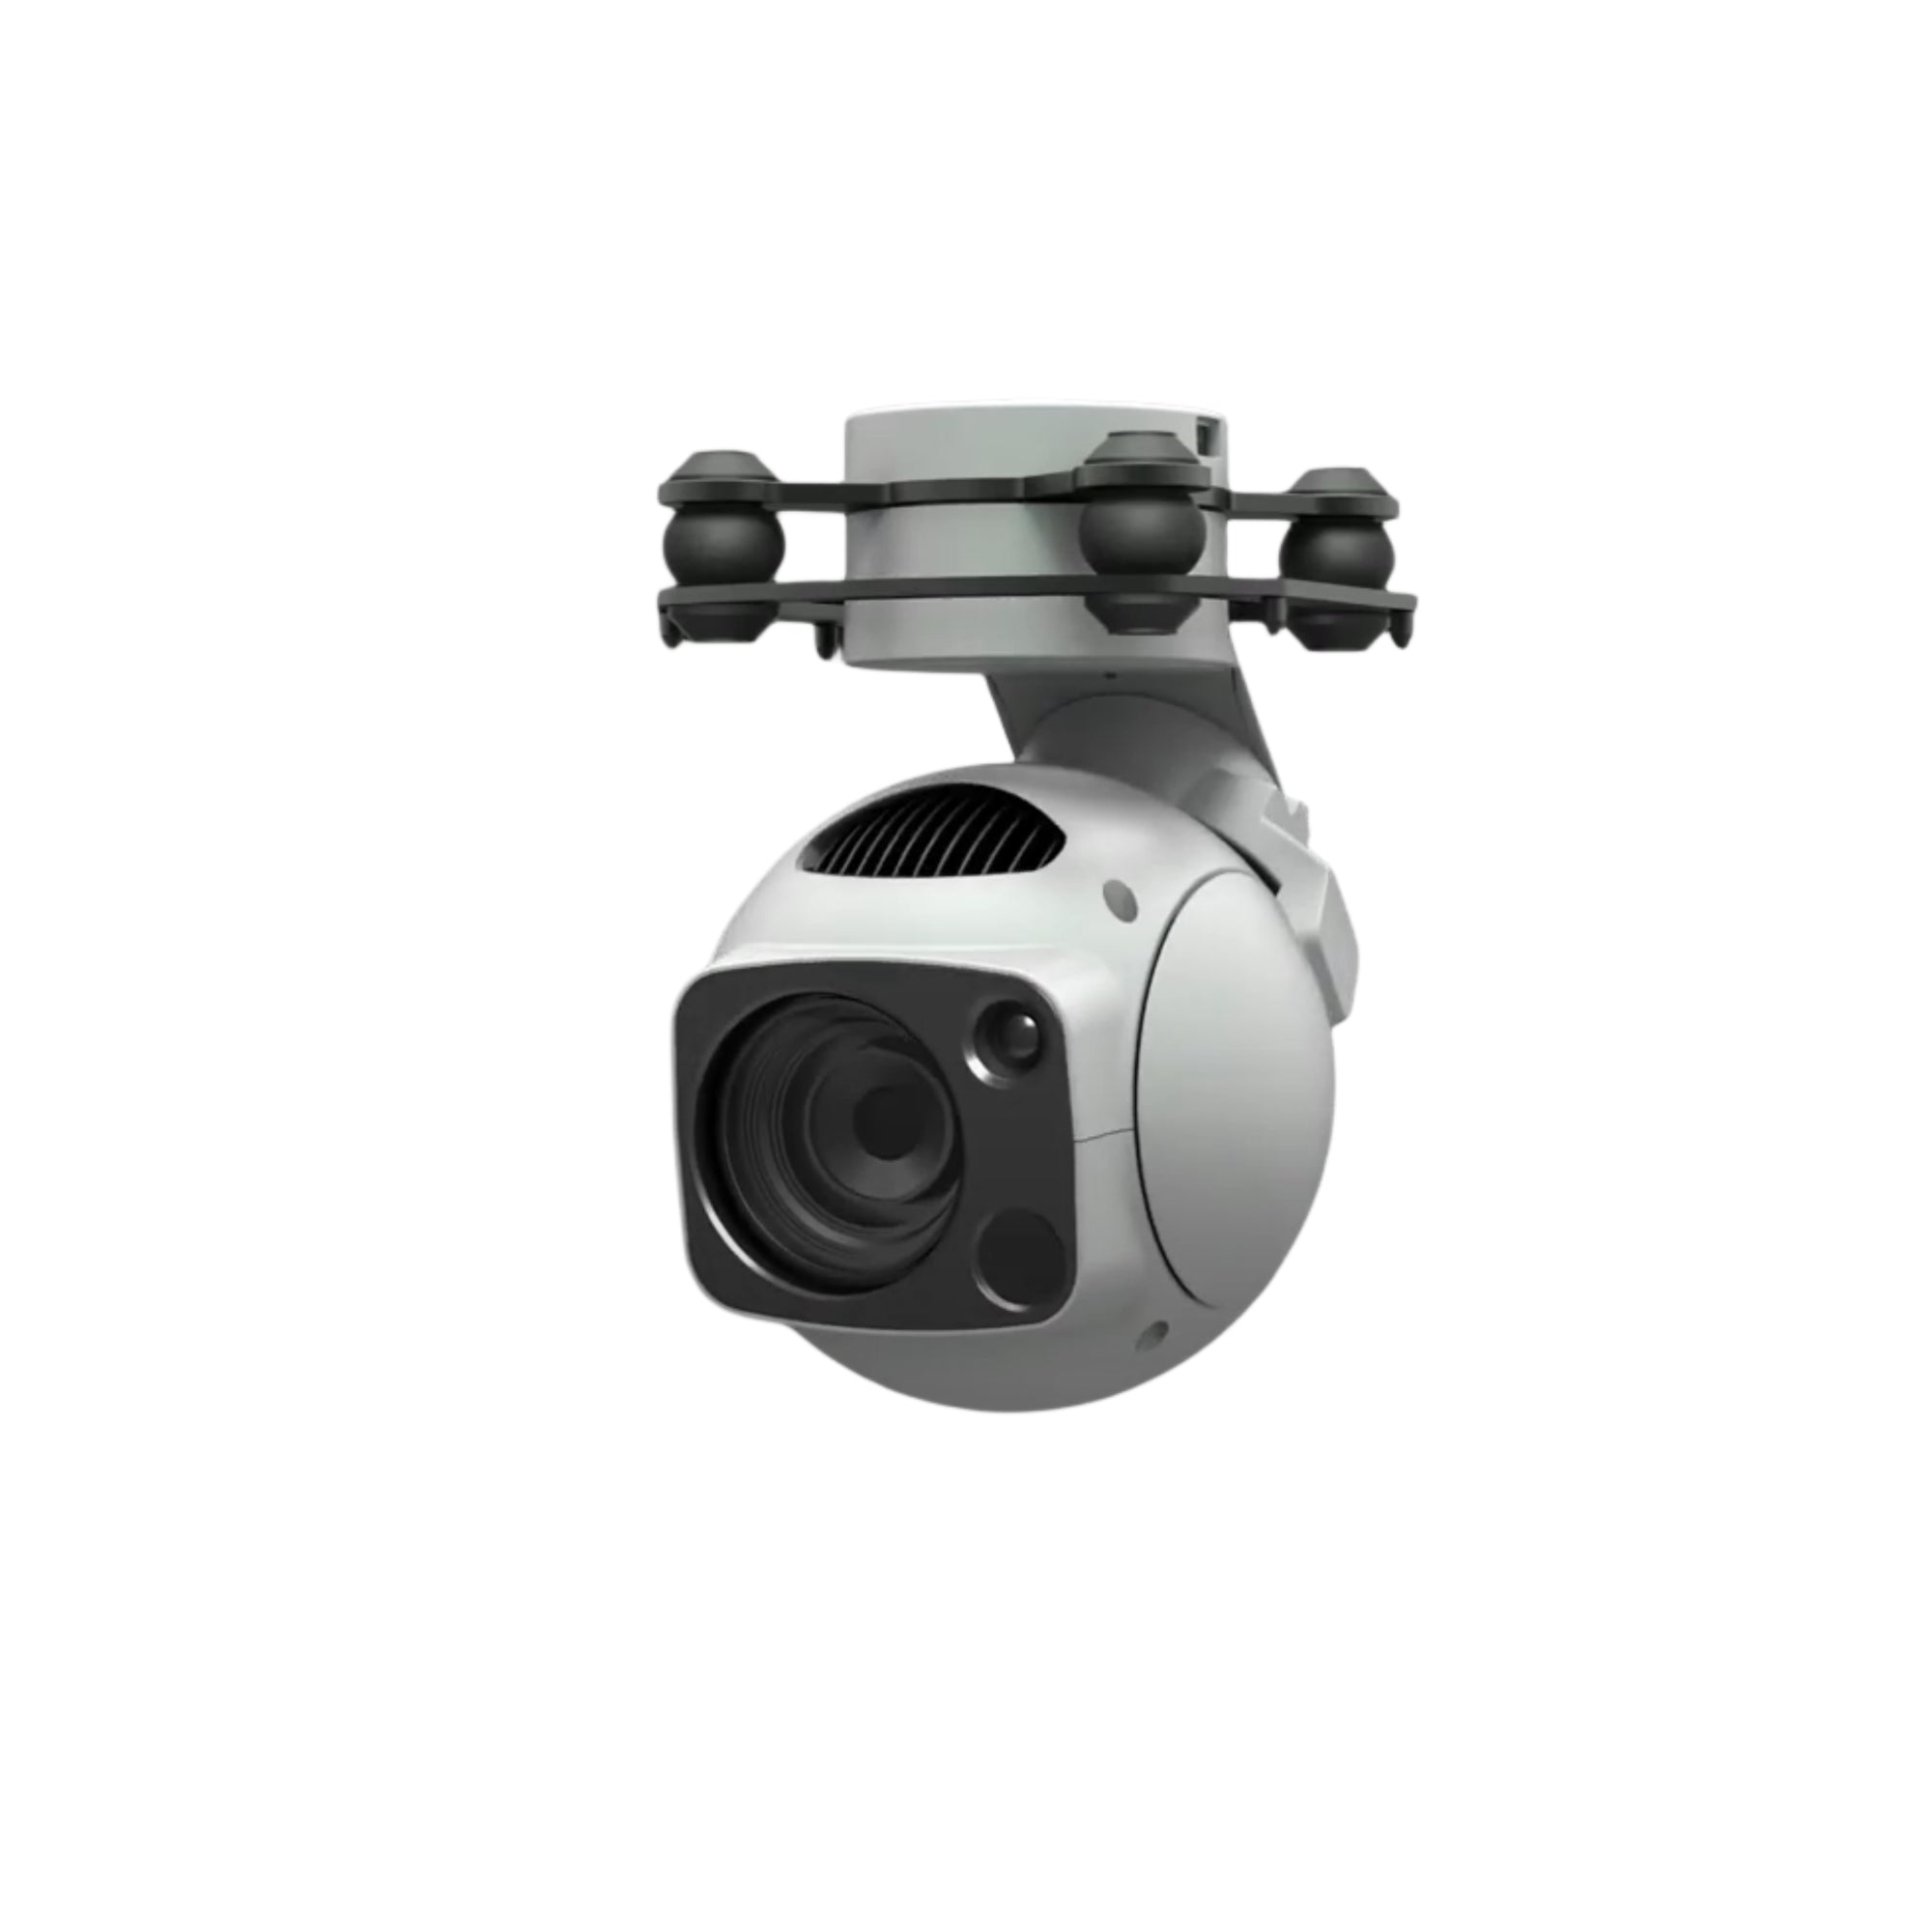 A80I Gimbal Payload Camera-10XOptical Zoom and Wide Angle RGB (Night Verion View) - Unmanned RC